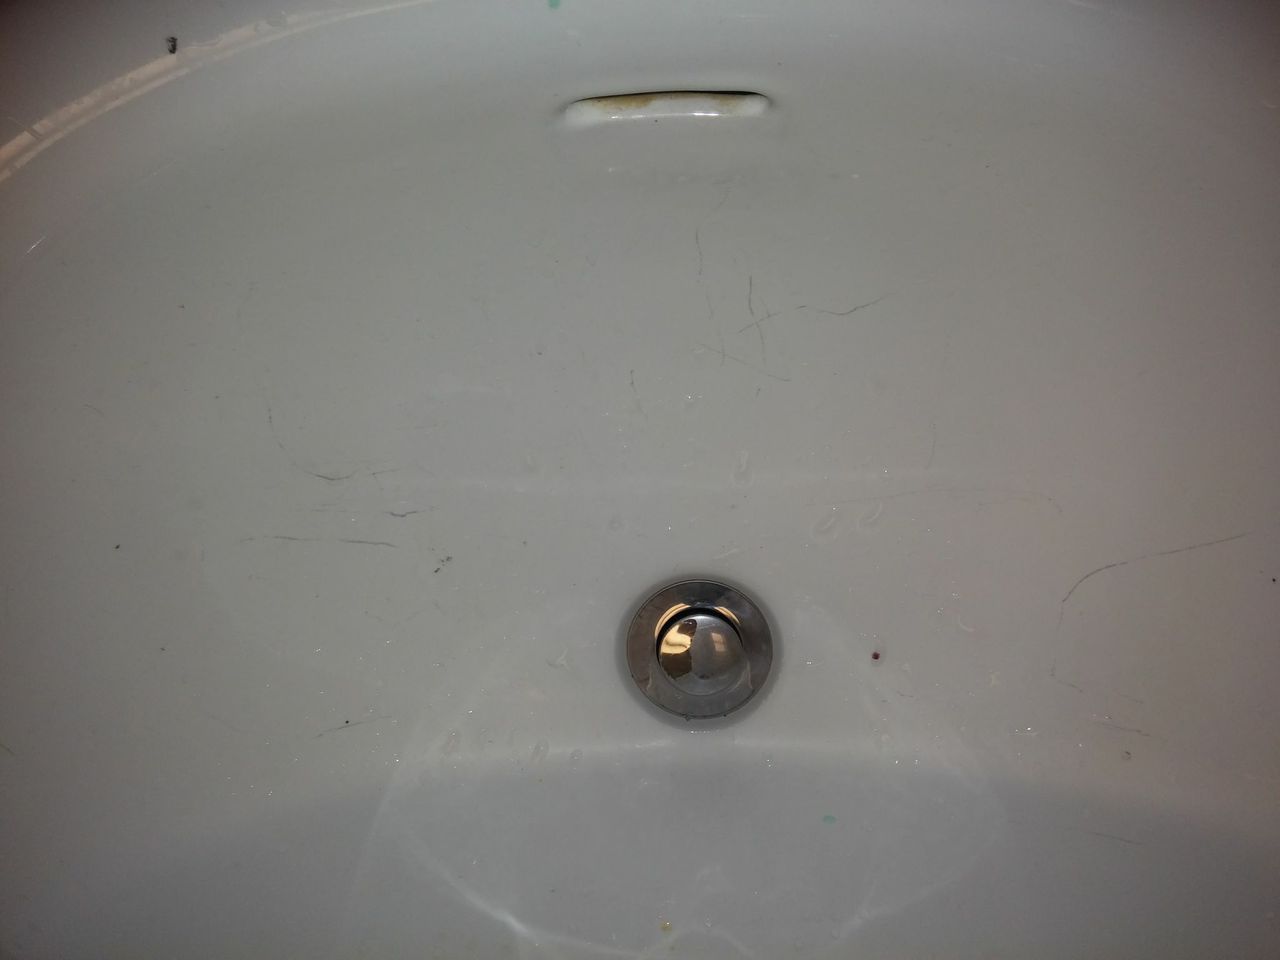 The sink